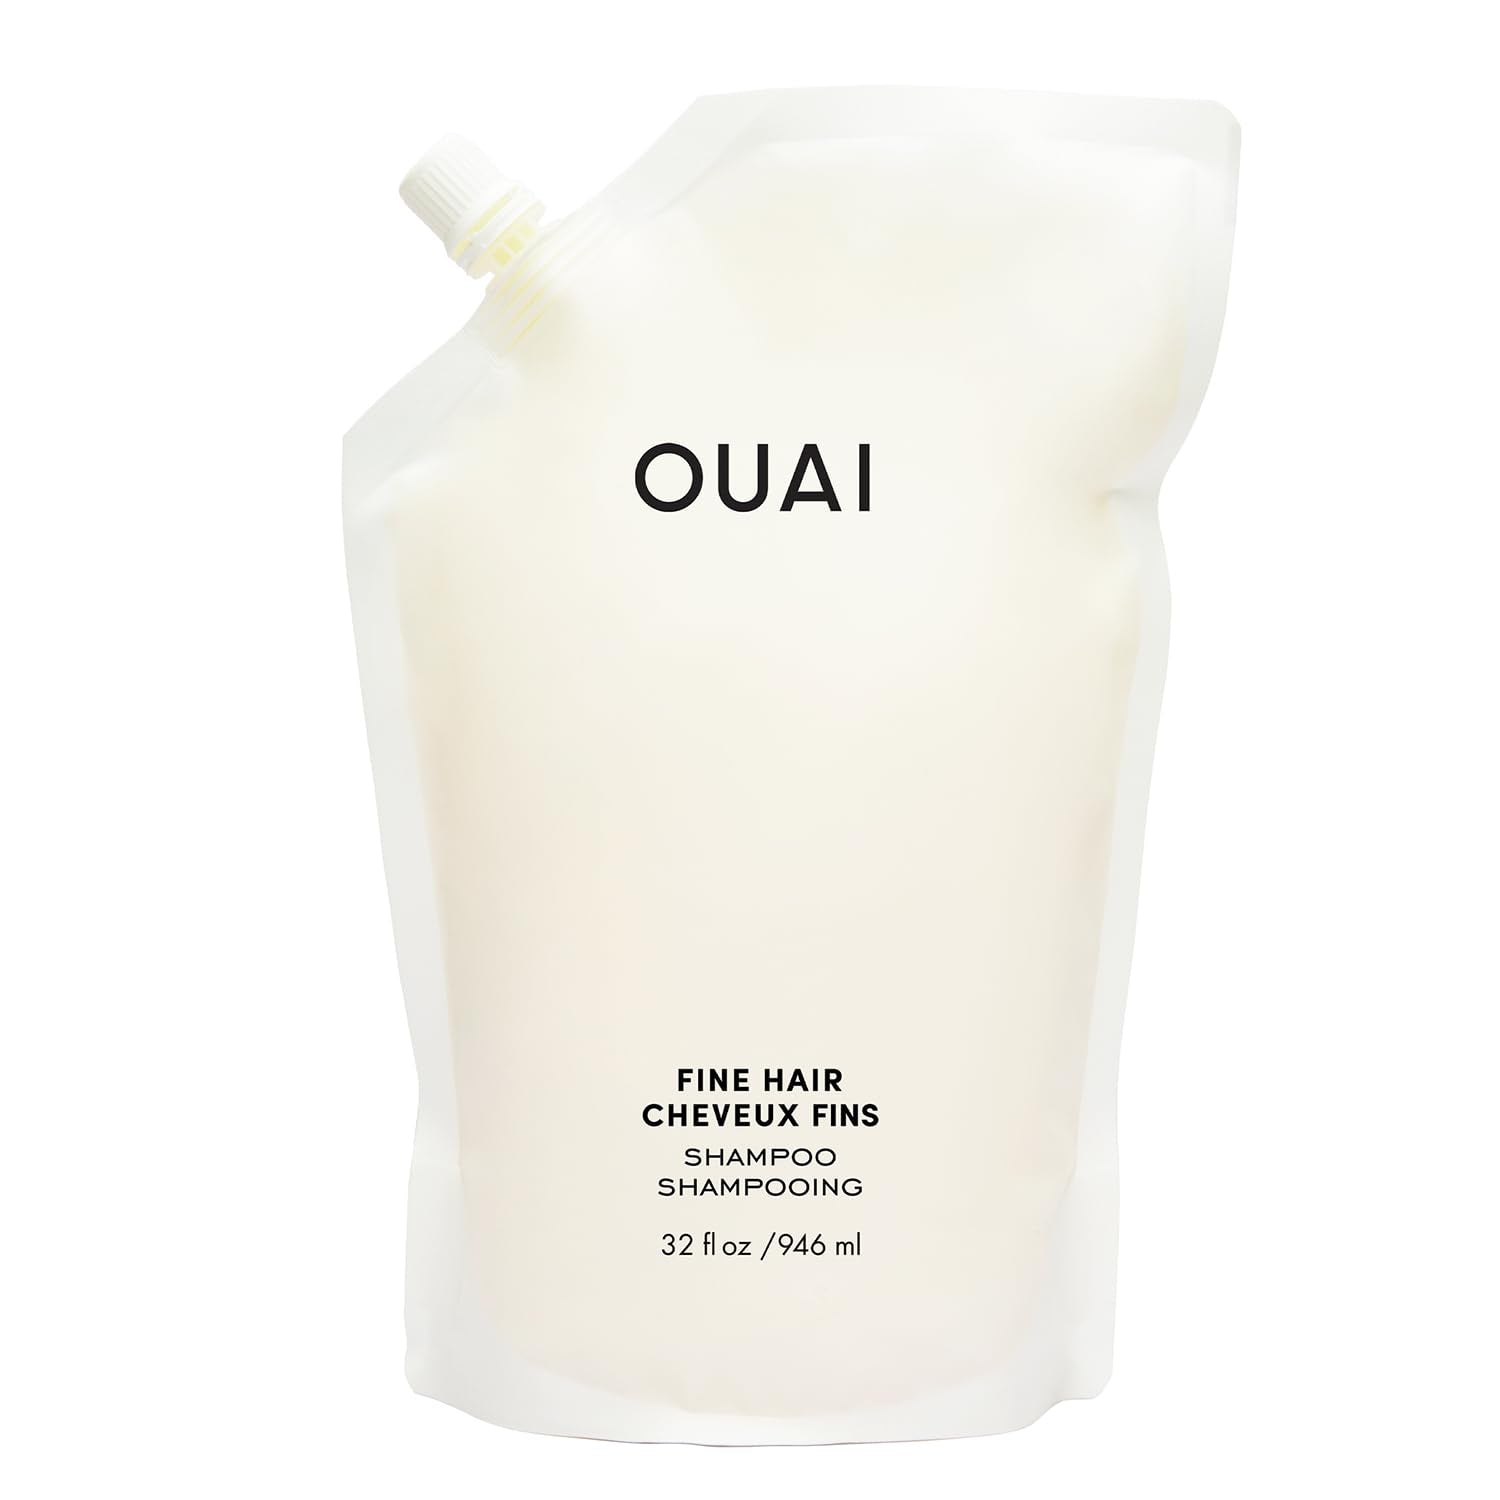 OUAI Fine Shampoo - Volumizing Shampoo with Strengthening Keratin, Biotin & Chia Seed Oil for Fine Hair - Delivers Clean, Weightless Body - Paraben, Phthalate & Sulfate Free Hair Care - 10 Fl Oz